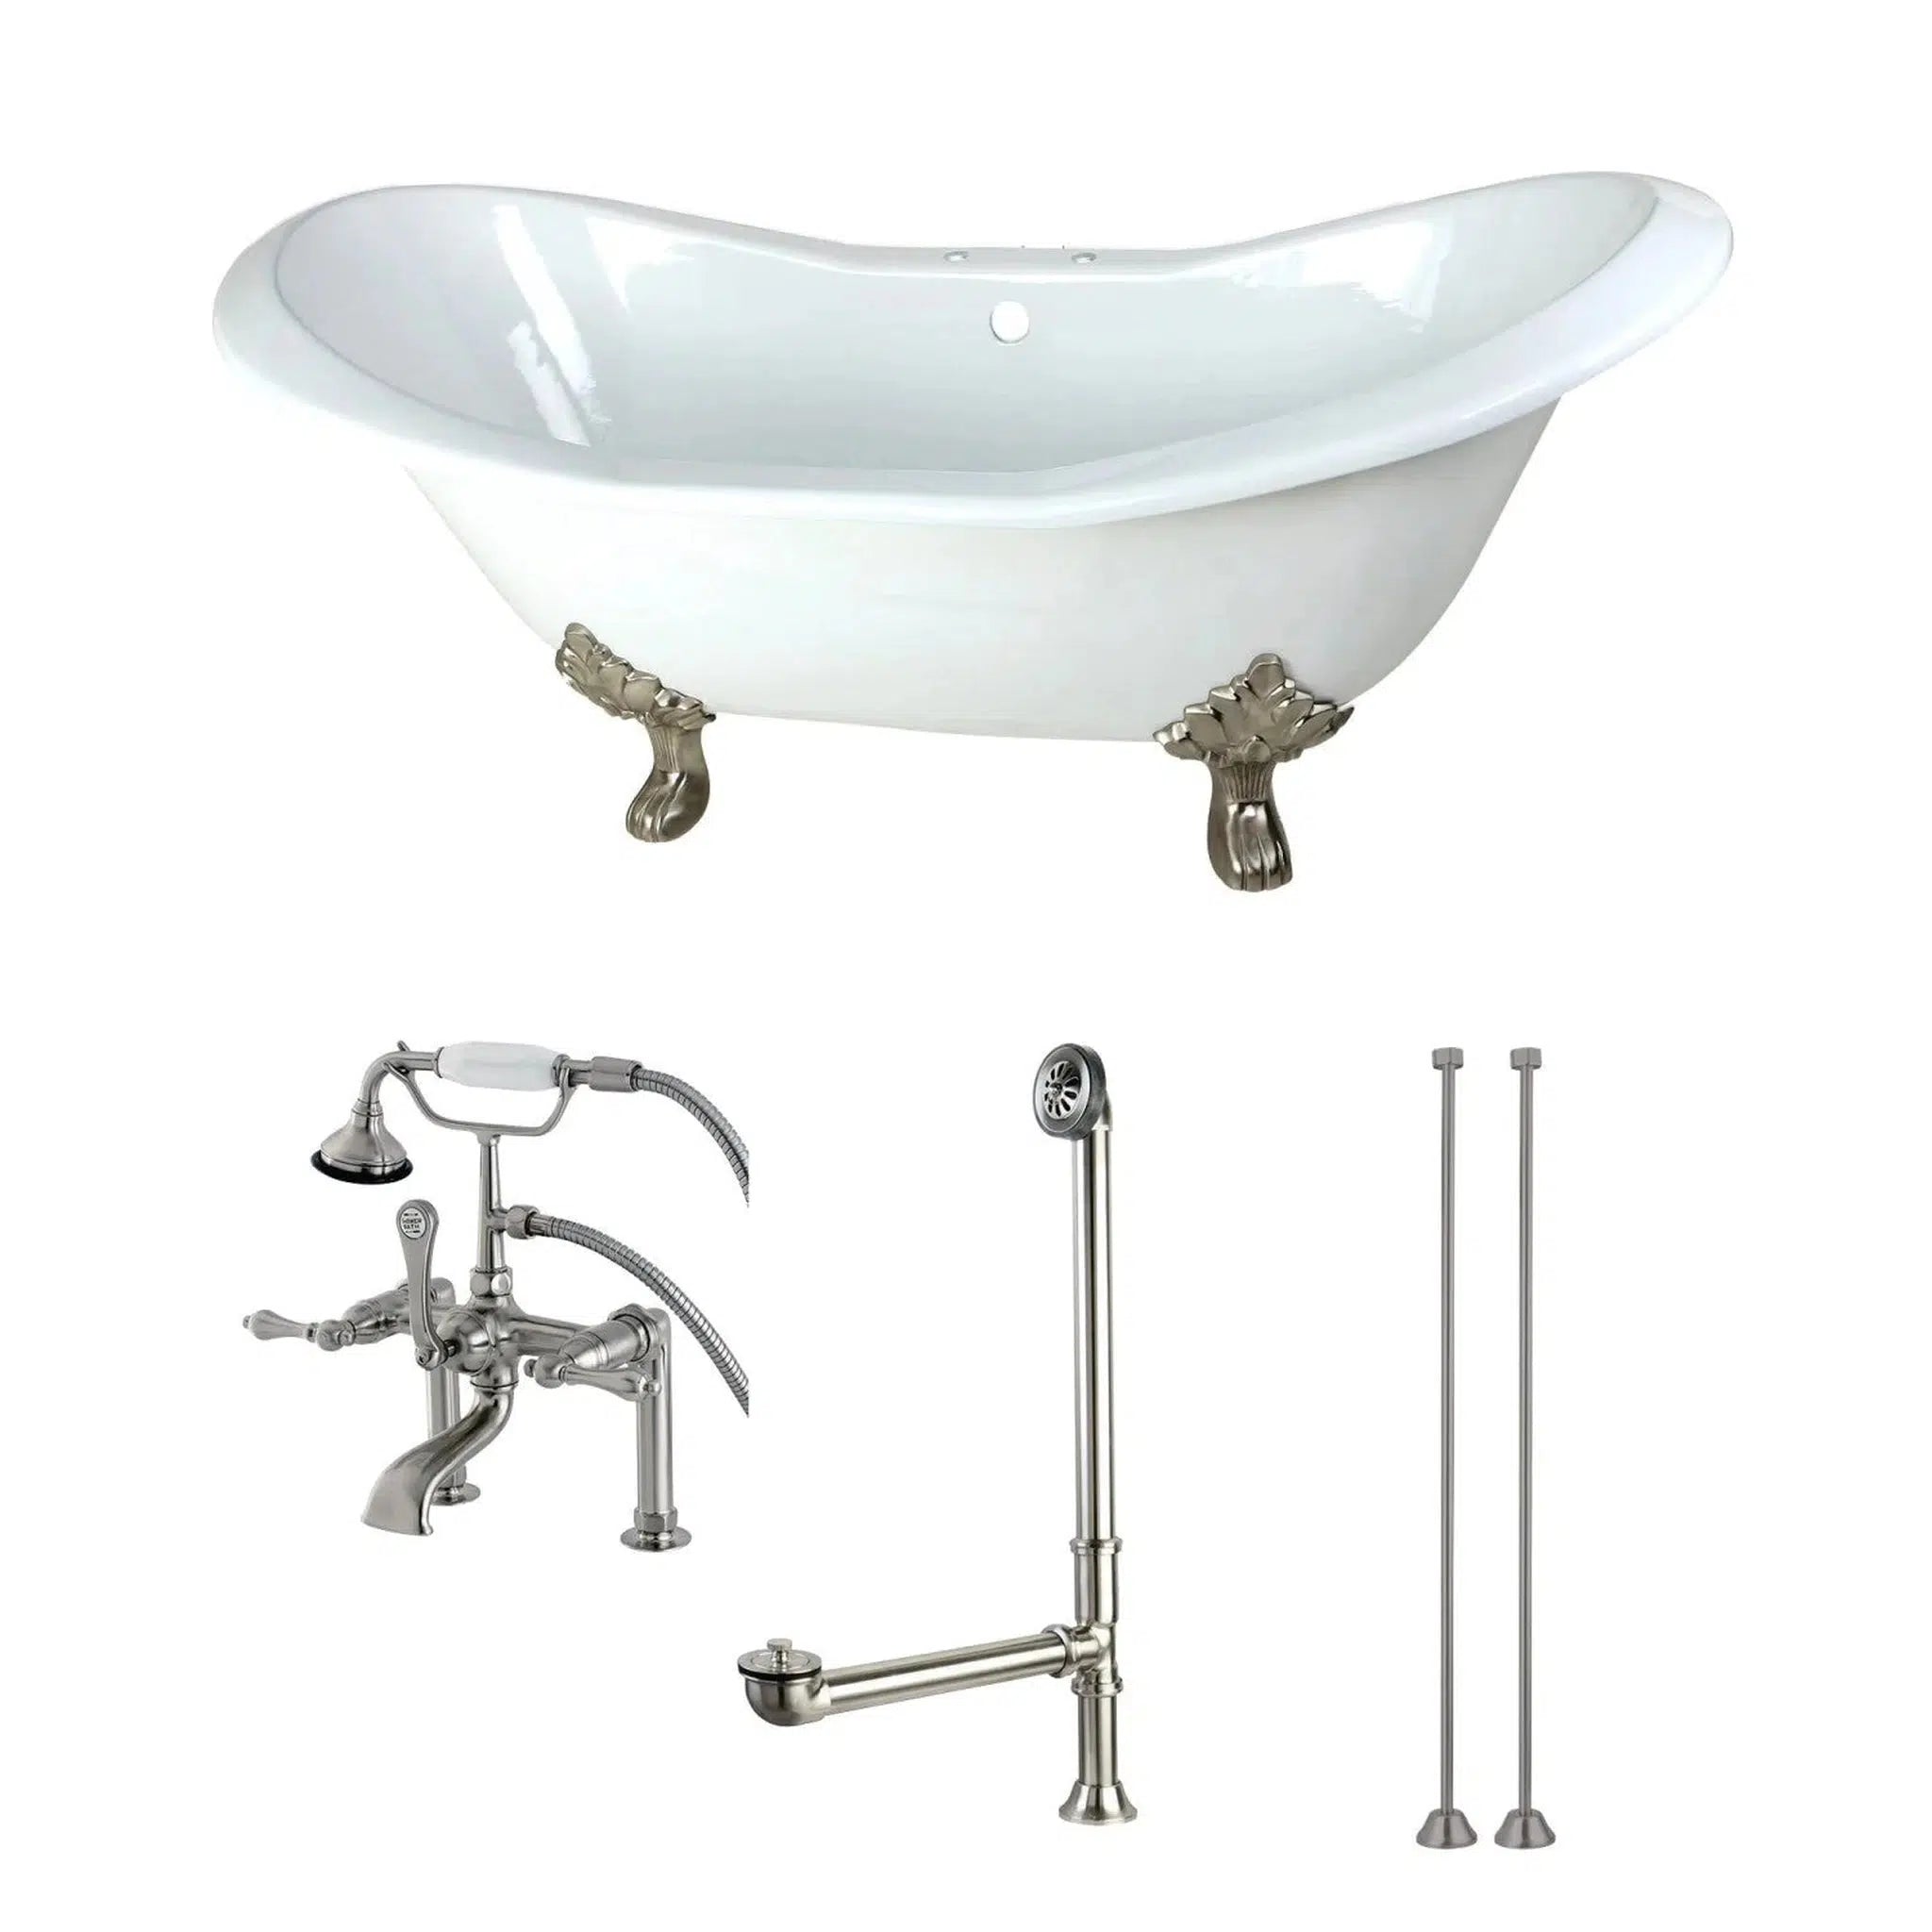 https://cdn.shopify.com/s/files/1/0555/9527/0317/products/Kingston-Brass-Aqua-Eden-72-x-31-WhiteBrushed-Nickel-Cast-Iron-Double-Slipper-Deck-Mount-Clawfoot-Bathtub-With-Drain-and-Overflow.webp?v=1673101873